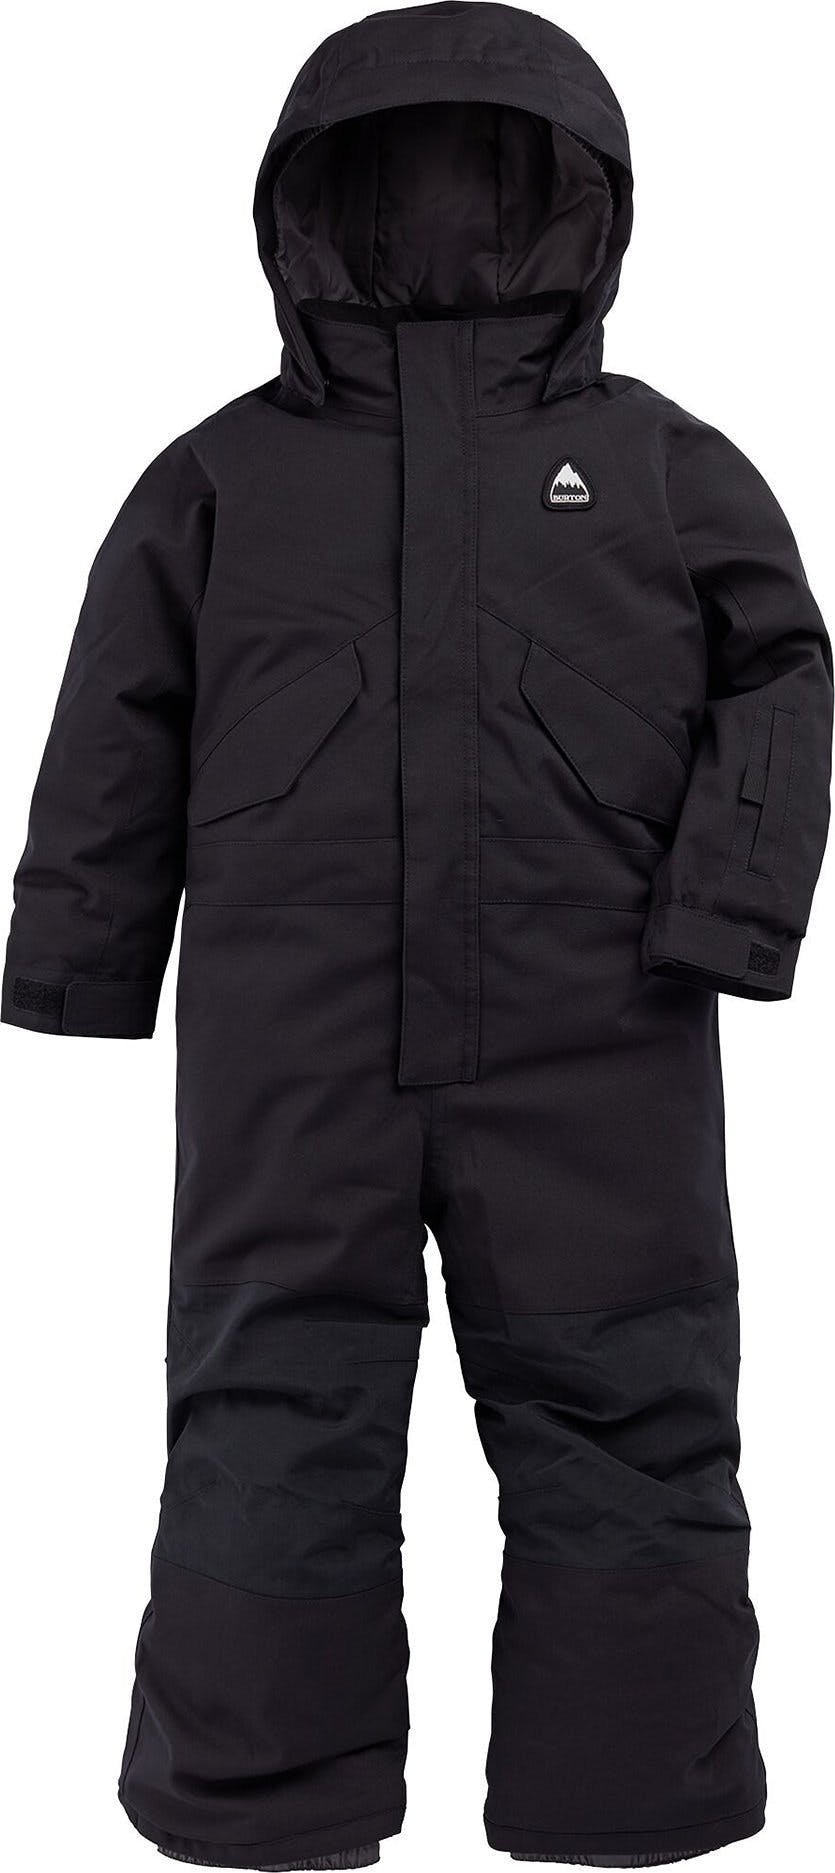 Product image for Snow Suit - Toddler